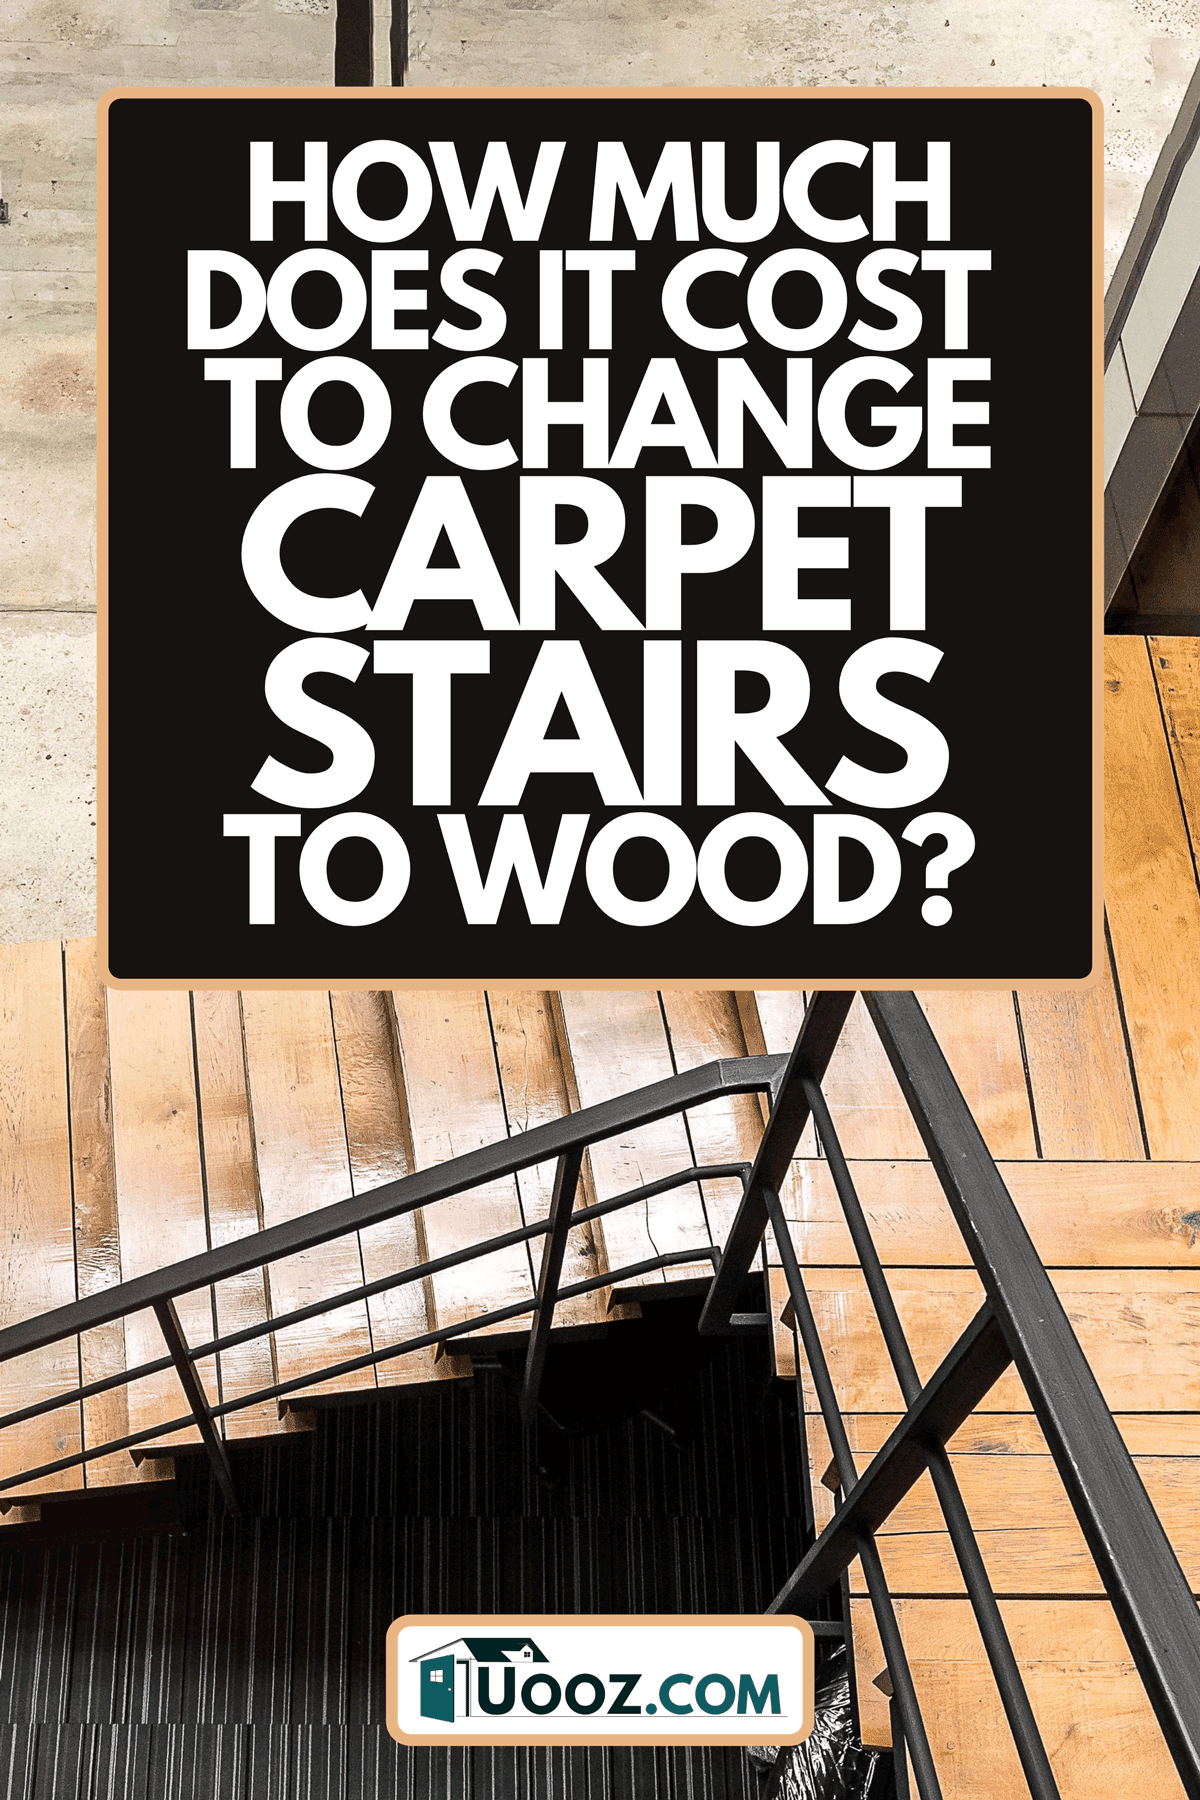 A wooden stairs at modern office, How Much Does It Cost To Change Carpet Stairs To Wood?